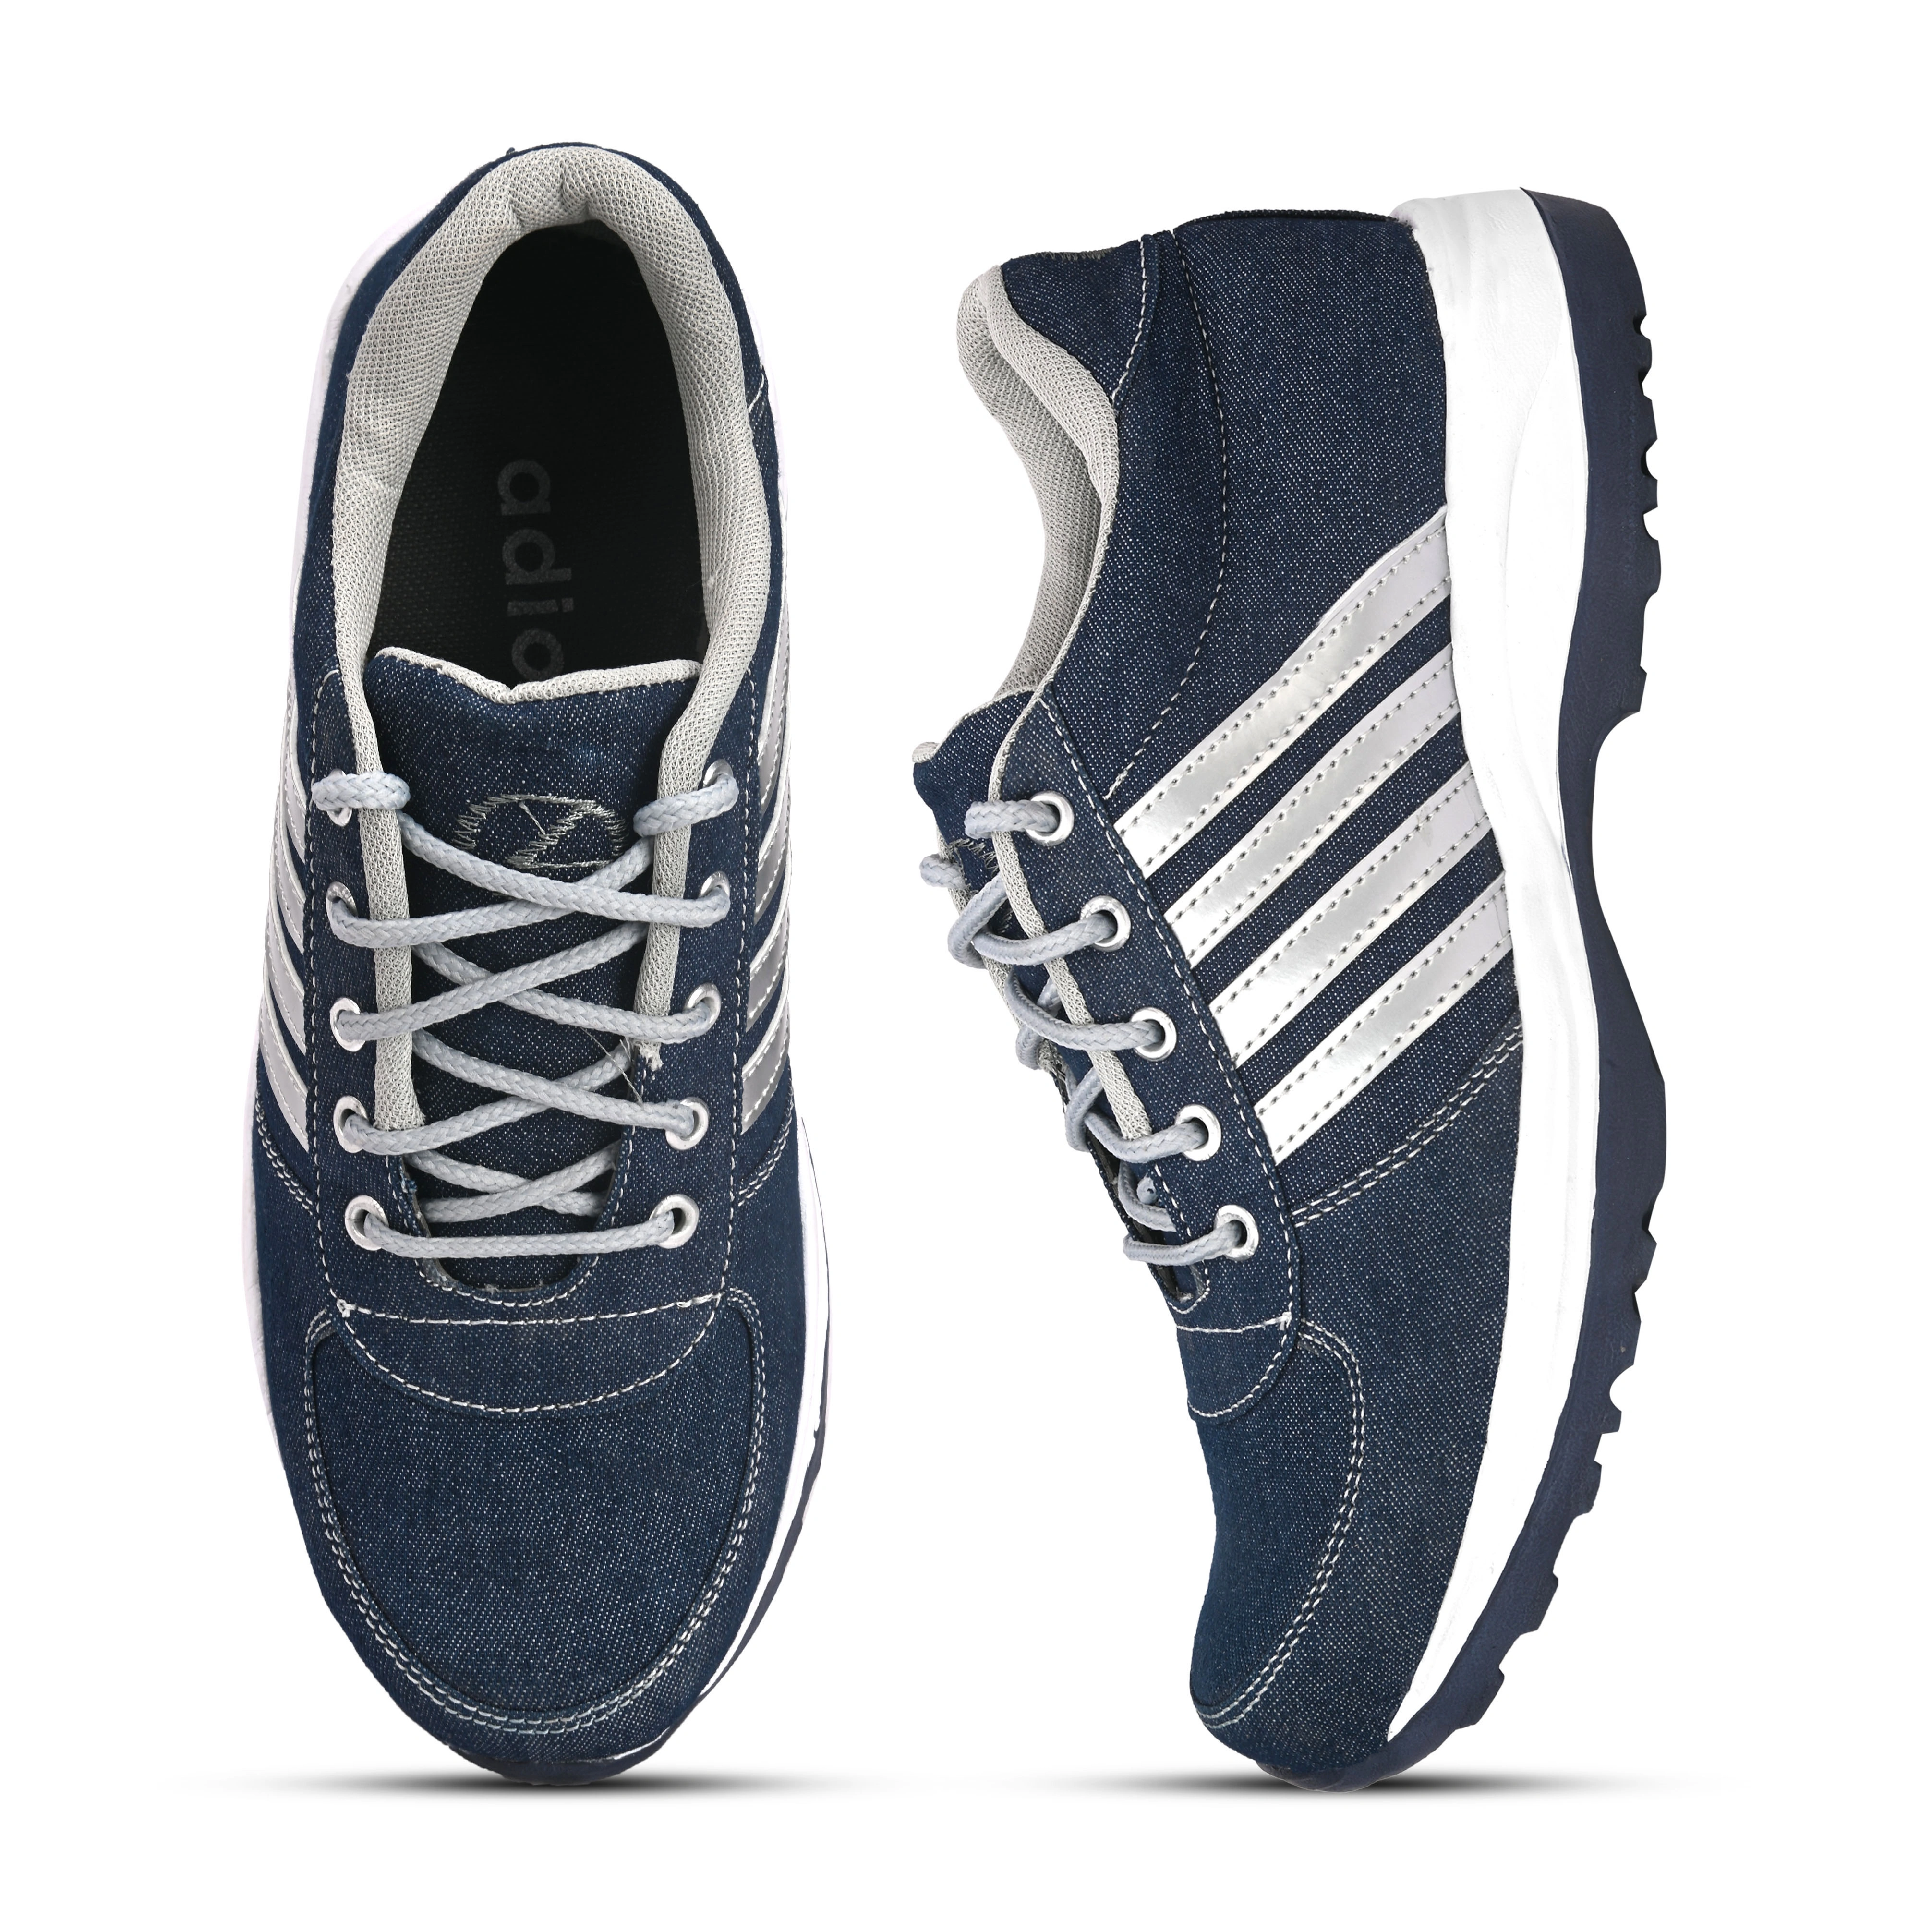 Men's Sports Shoes for Running / Jogging / Walking / Gymnasium (Denim Blue) Shoe For Every Sport By Applause Collection-6-5